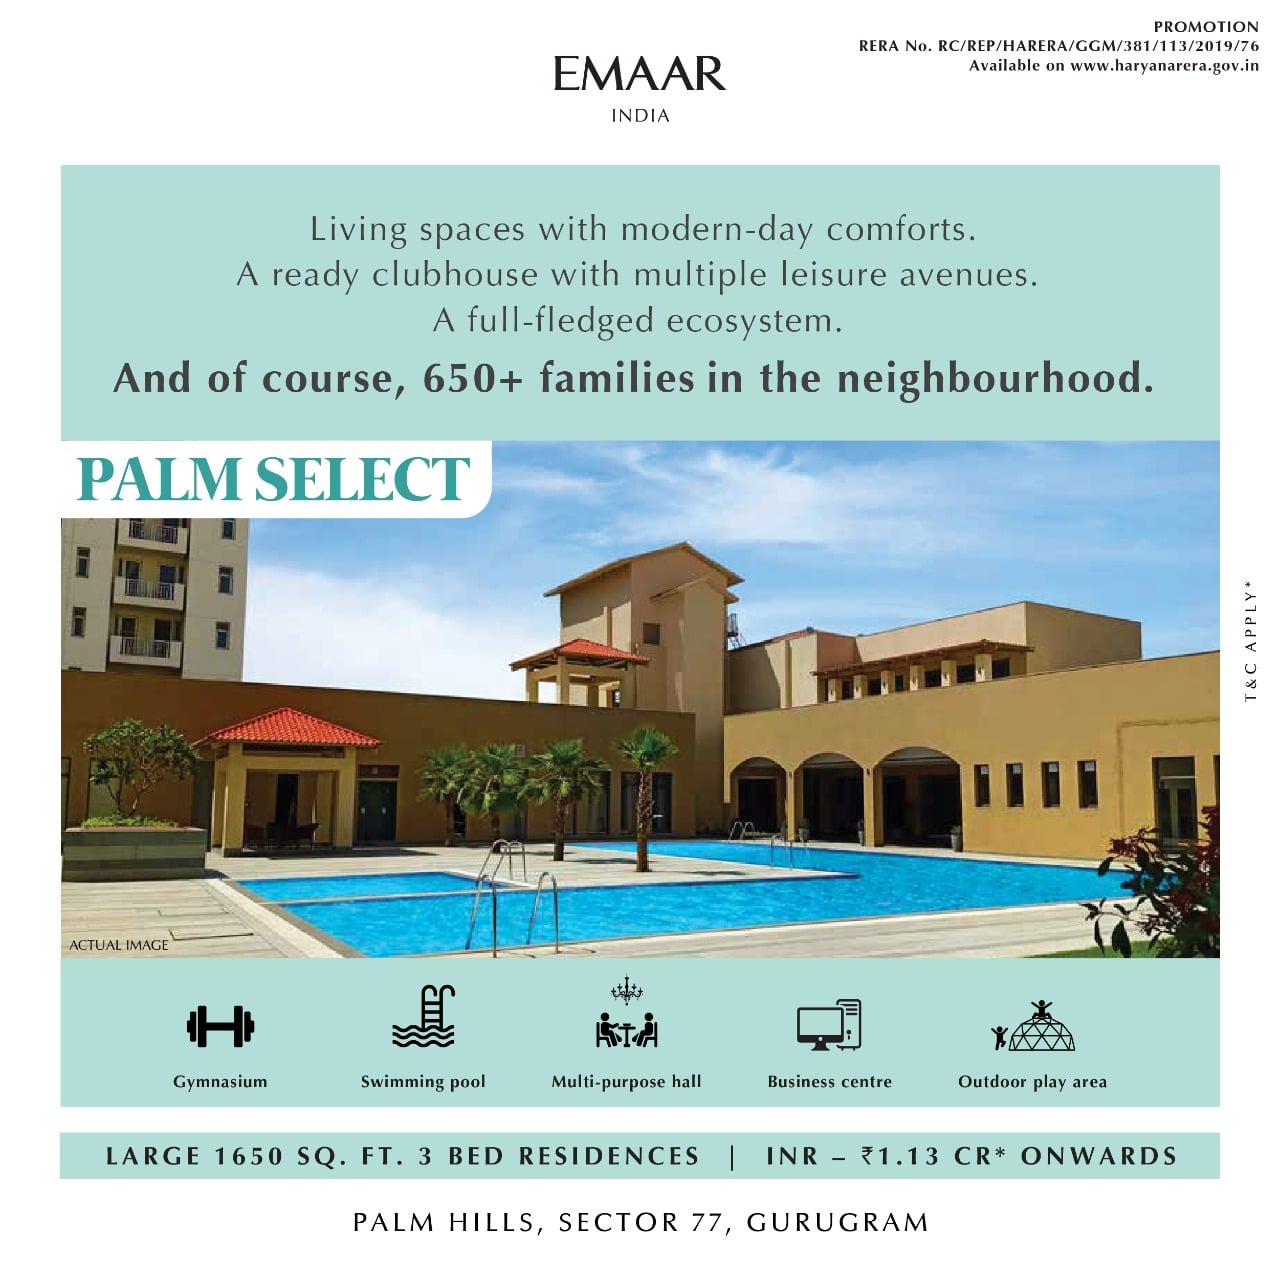 A ready clubhouse with multiple leisure avenues at Emaar Palm Select, Gurgaon Update